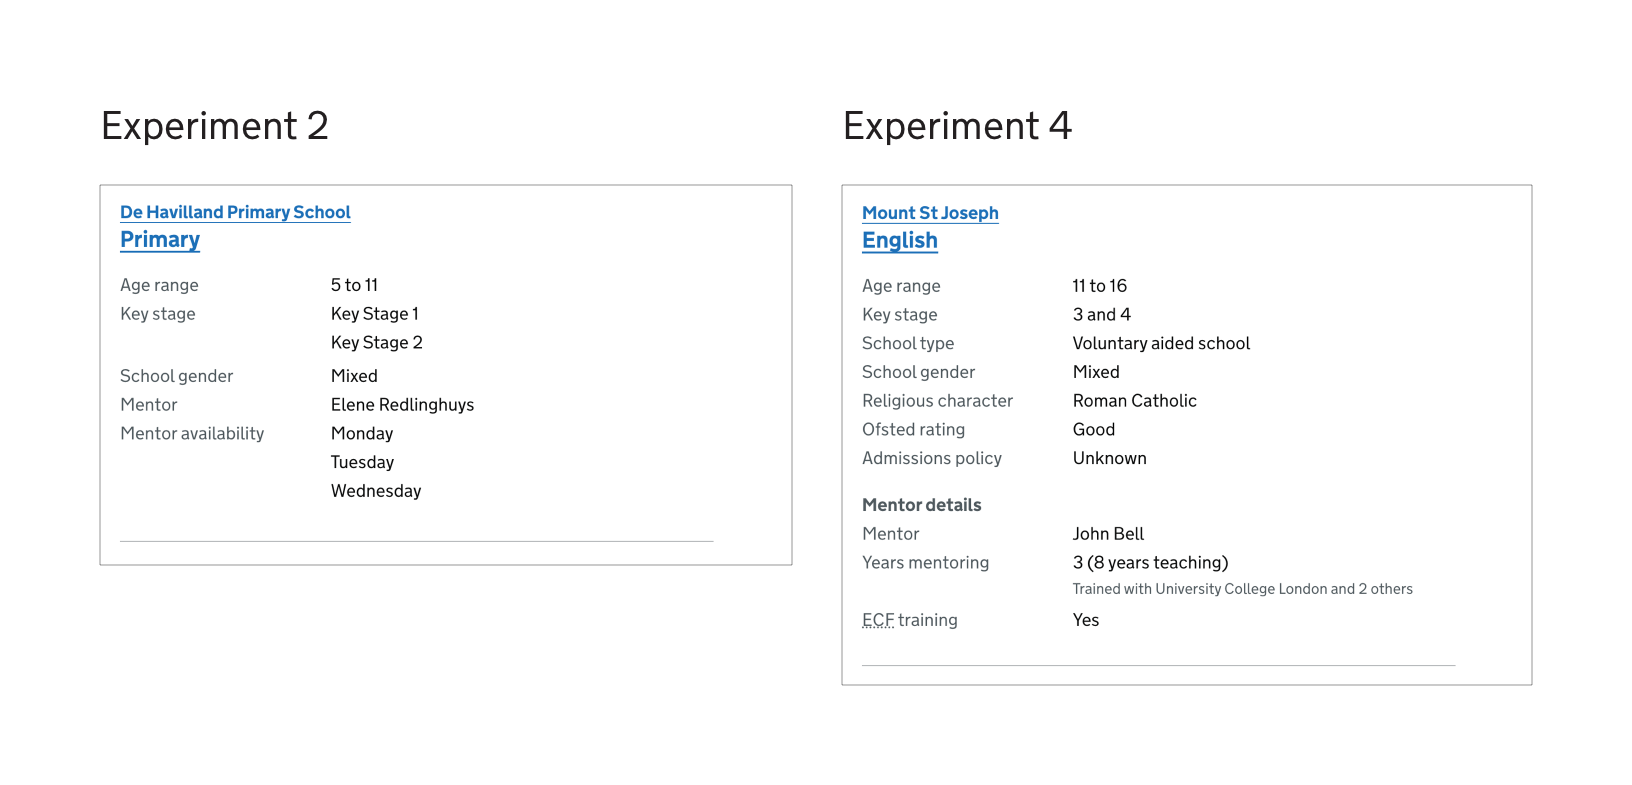 Image showing the change in search results content and layout between experiments 2 and 4